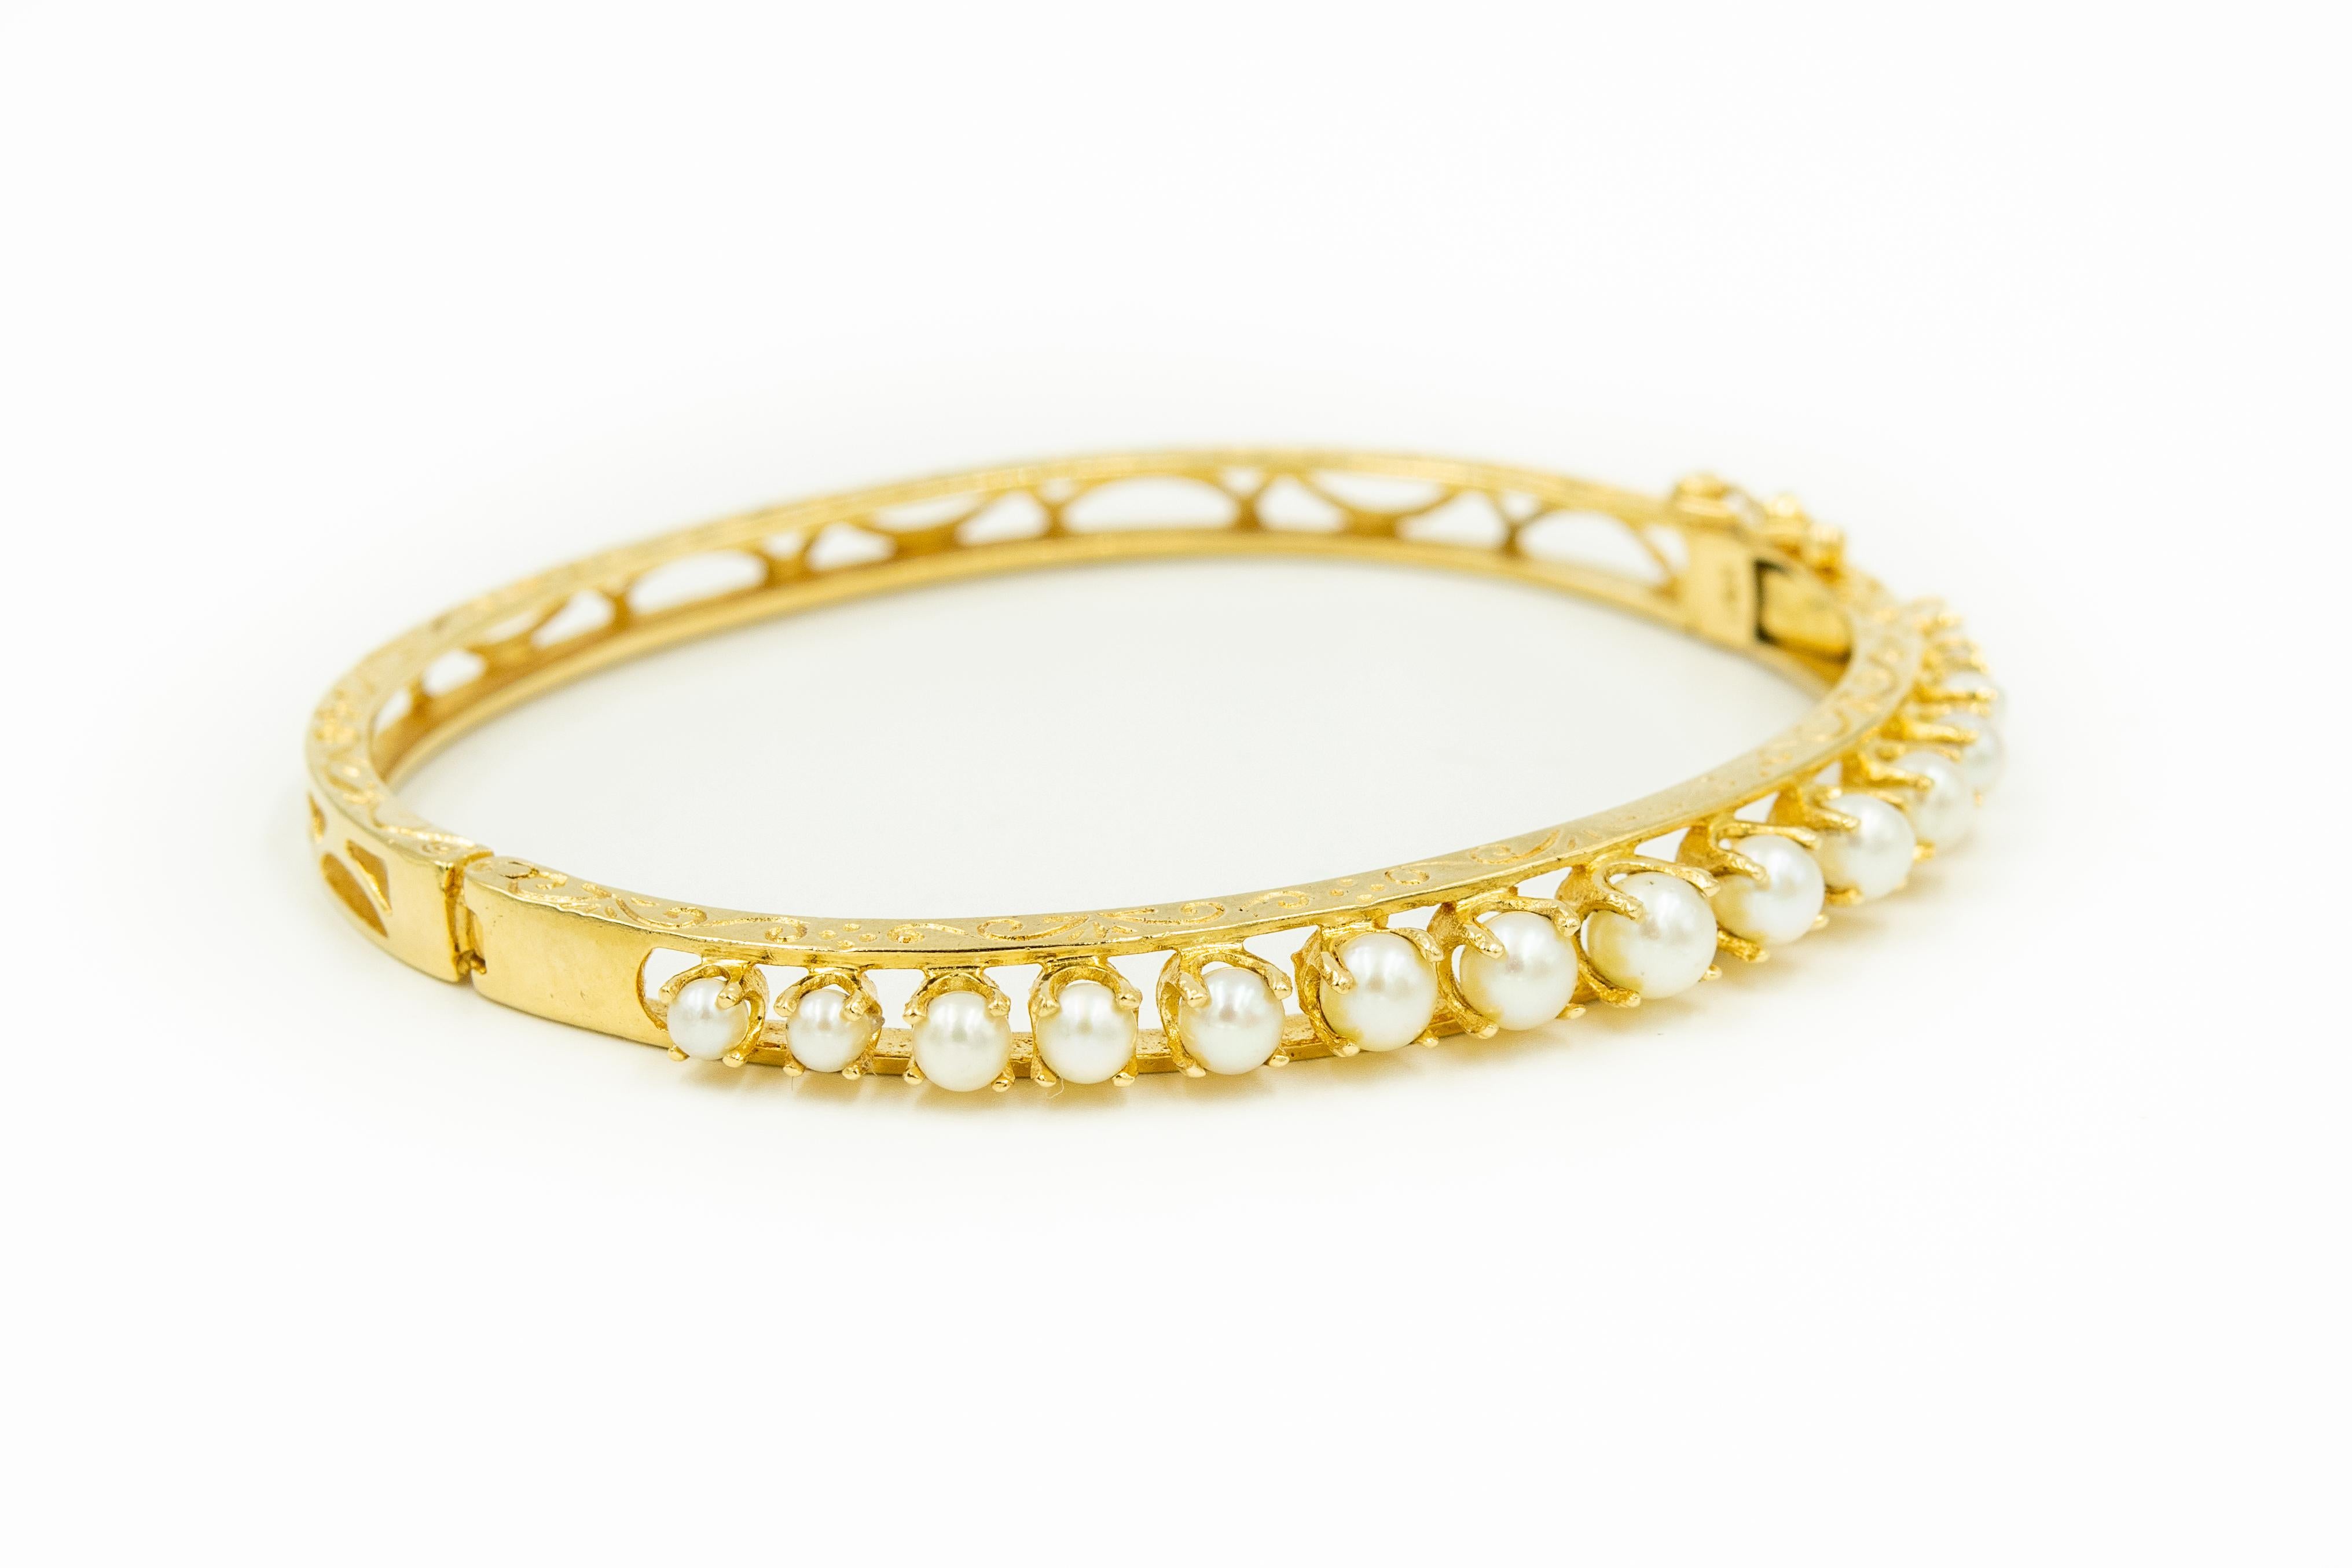 Classic 1950s elegant graduated cultured pearl bangle featuring 15 prong set cultured pearls (4.4mm-2.75mm) set in a 14k yellow gold bangle with etched scroll work along the top and bottom.  The back is pierced.  The bracelet hinges open and closes